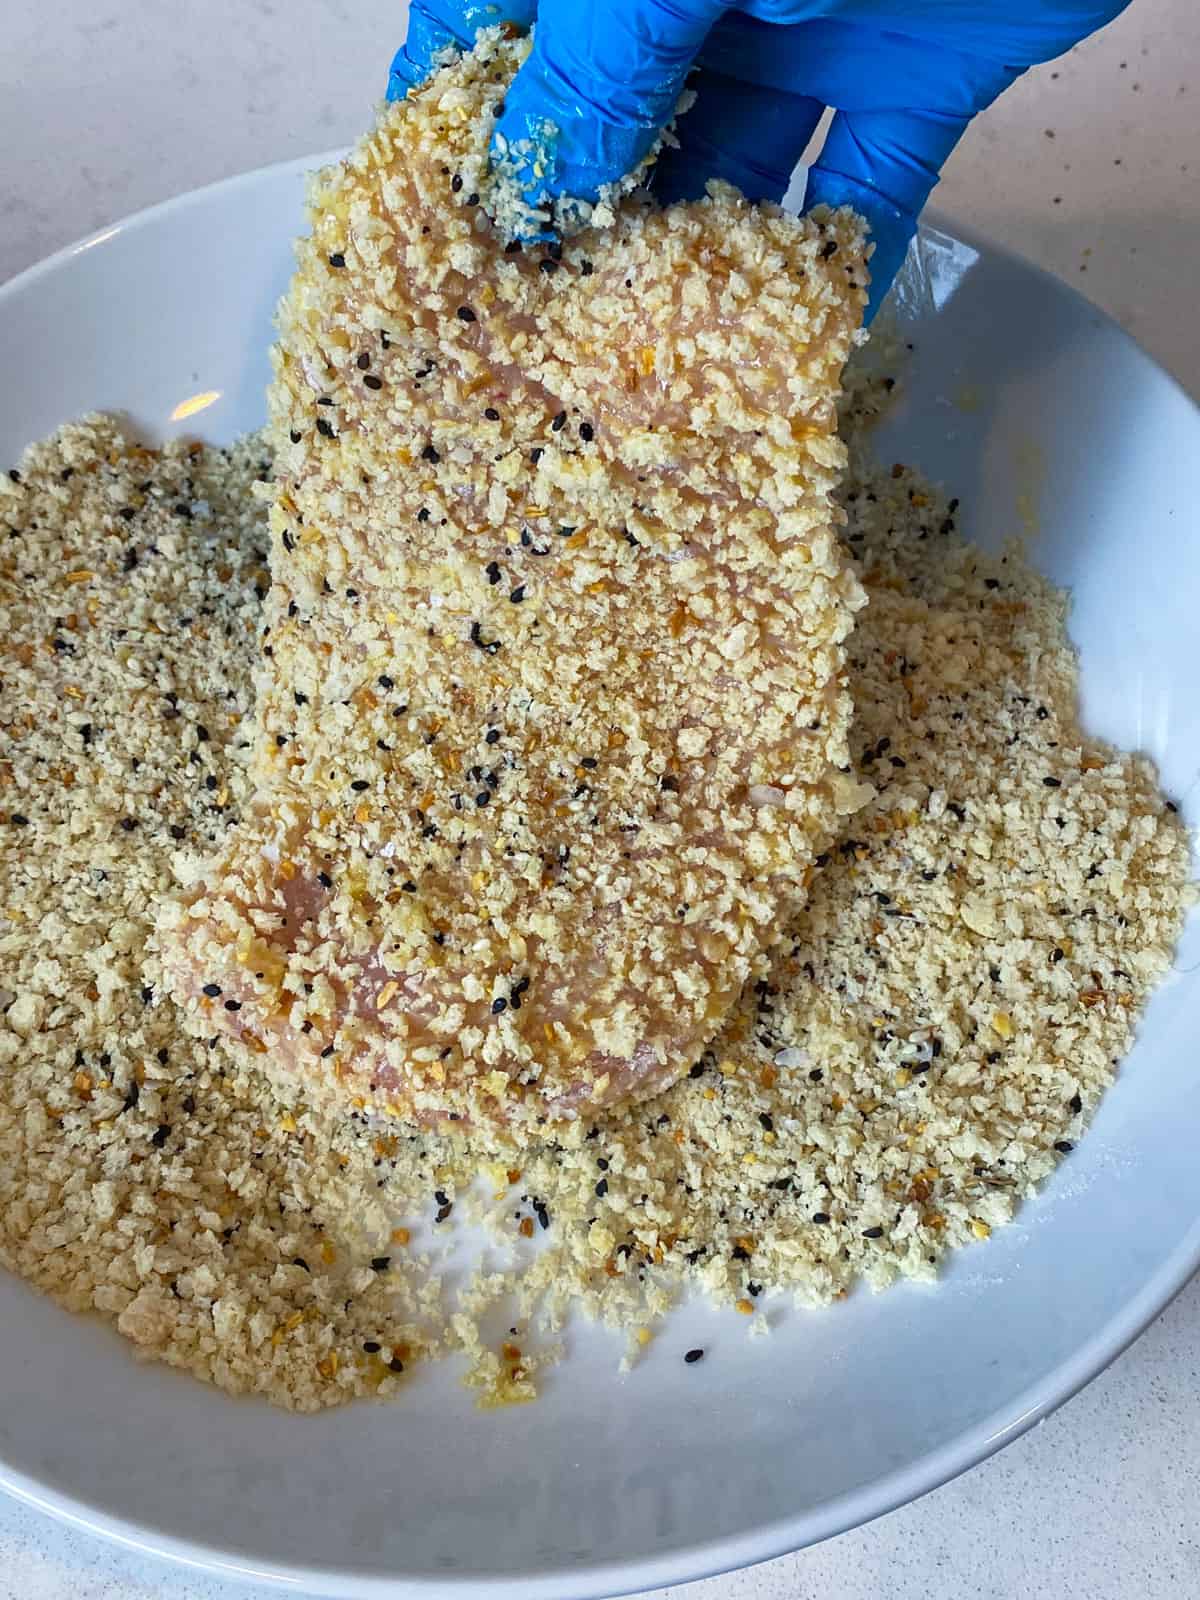 Press the chicken cutlets into panko breadcrumbs on both sides.